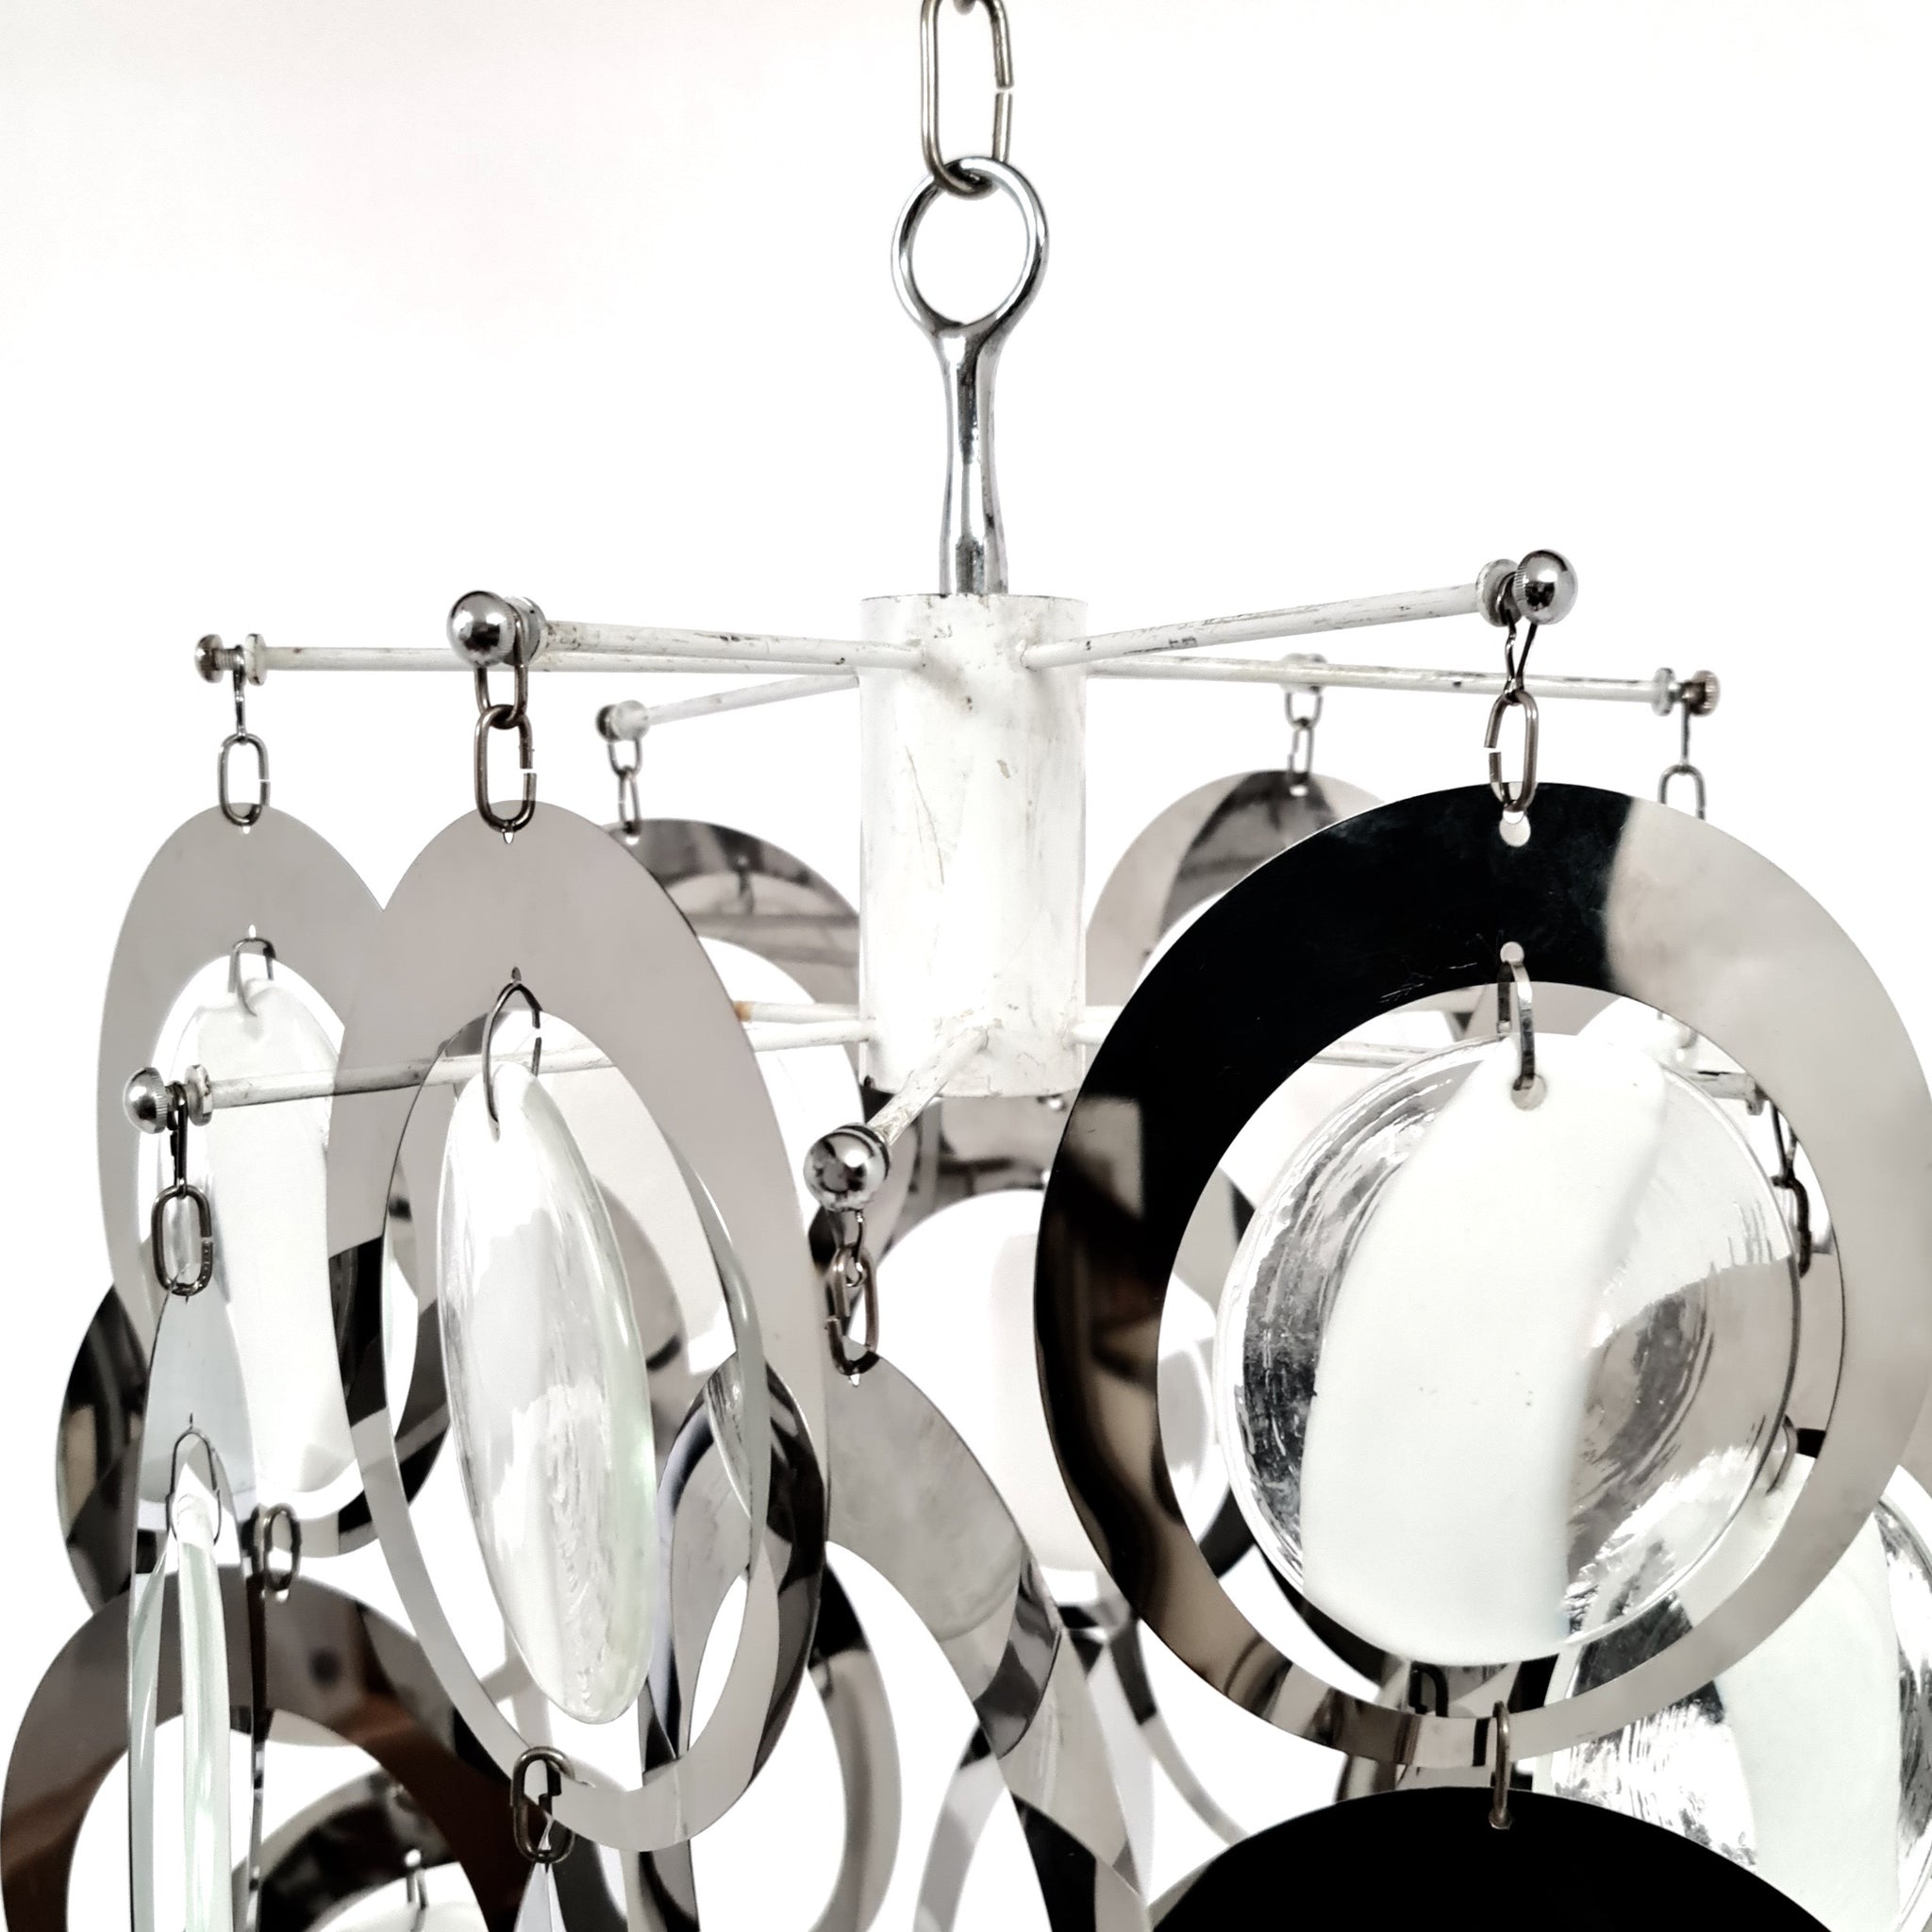 Large 1970's glass disk and chrome ring Italian hanging light.